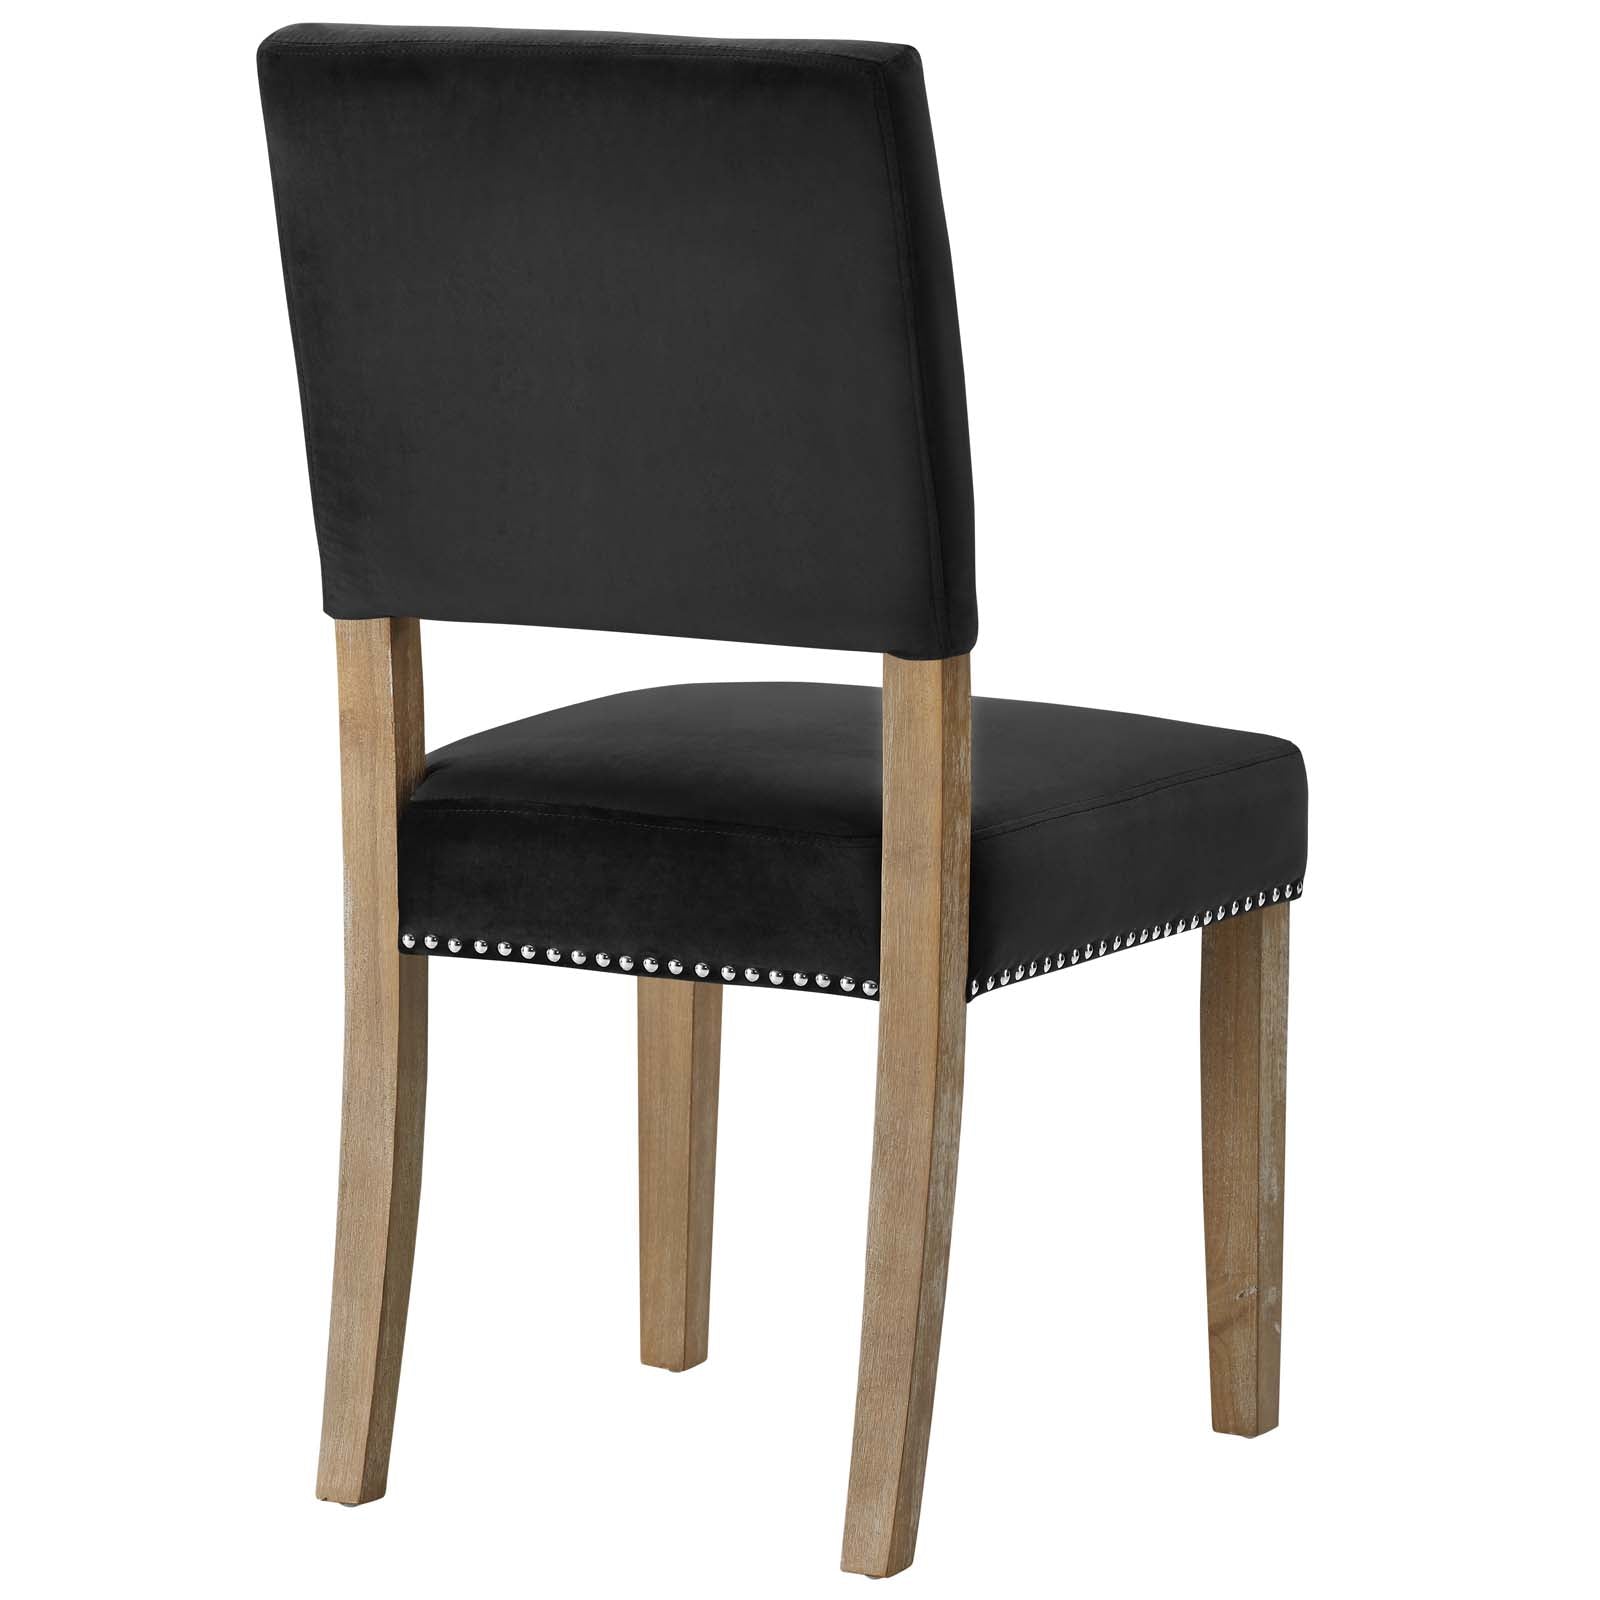 Modway Dining Chairs - Oblige Wood Dining Chair Black